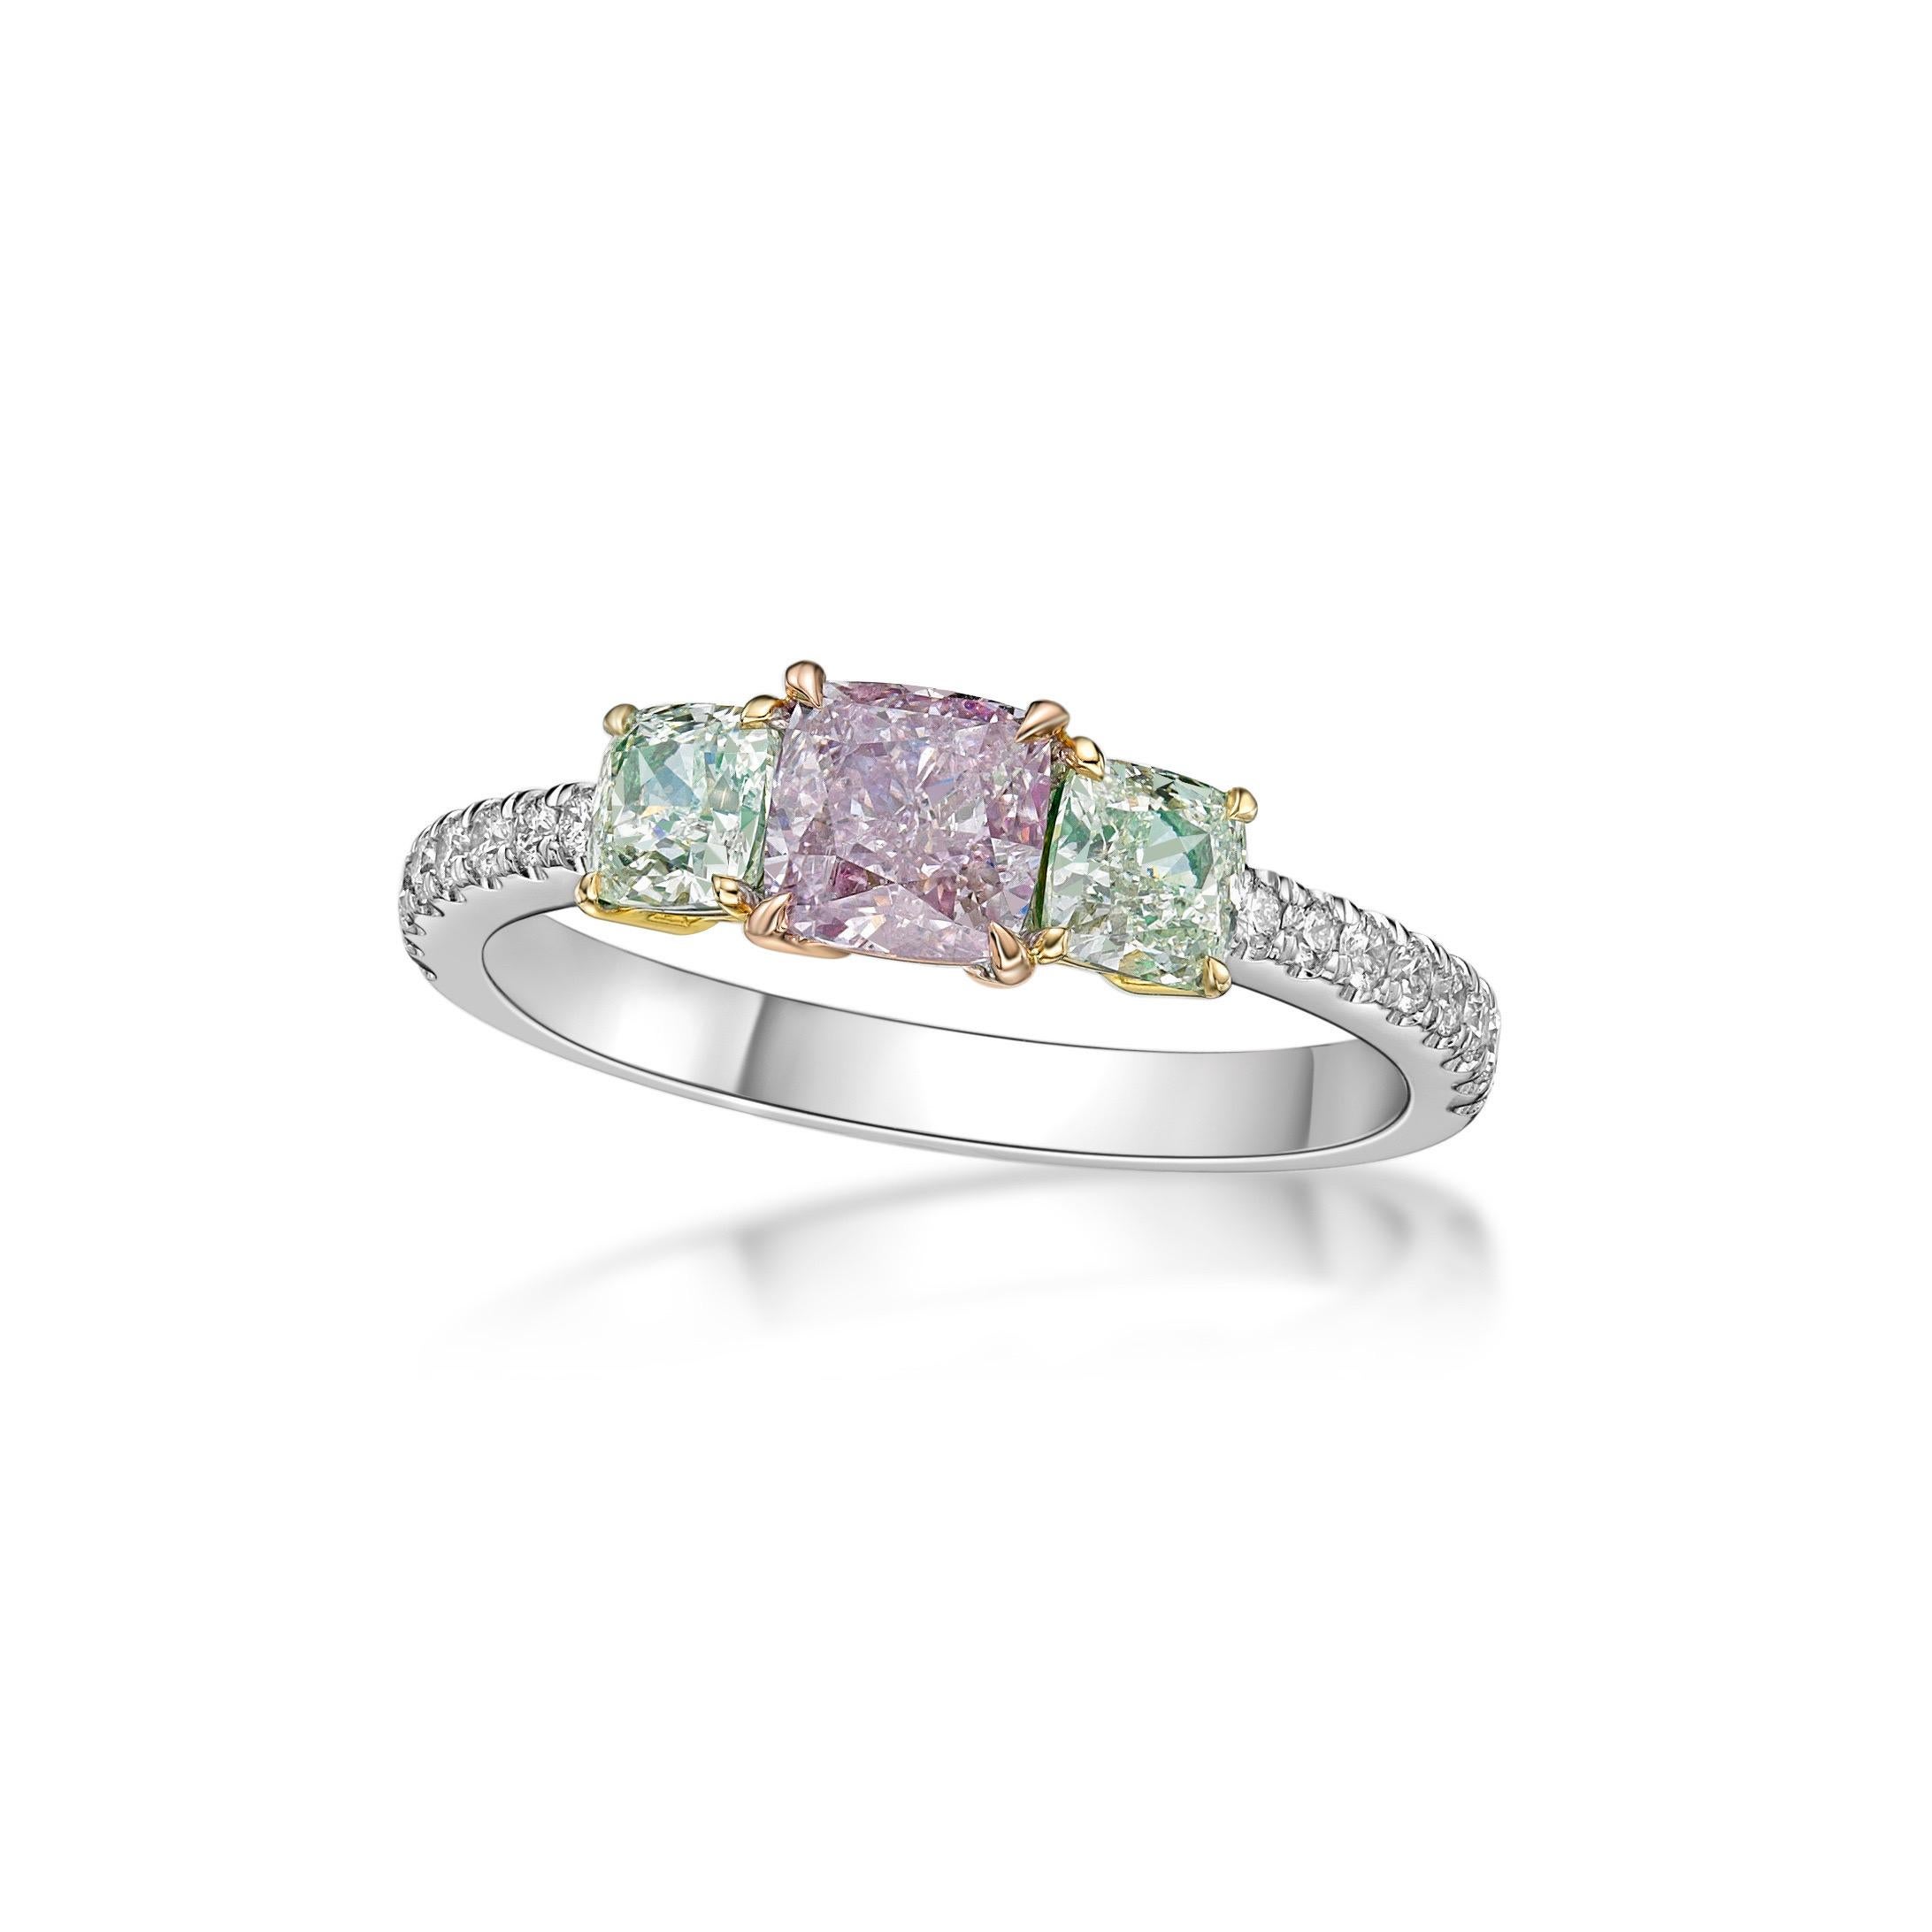 3 Center diamonds total 1.40ct
16 diamonds total 0.19ct

From The Museum Vault at Emilio Jewelry Located on New York's iconic Fifth Avenue,
Showcasing a very special and rare Gia certified natural pink purple diamond and green in center. Total